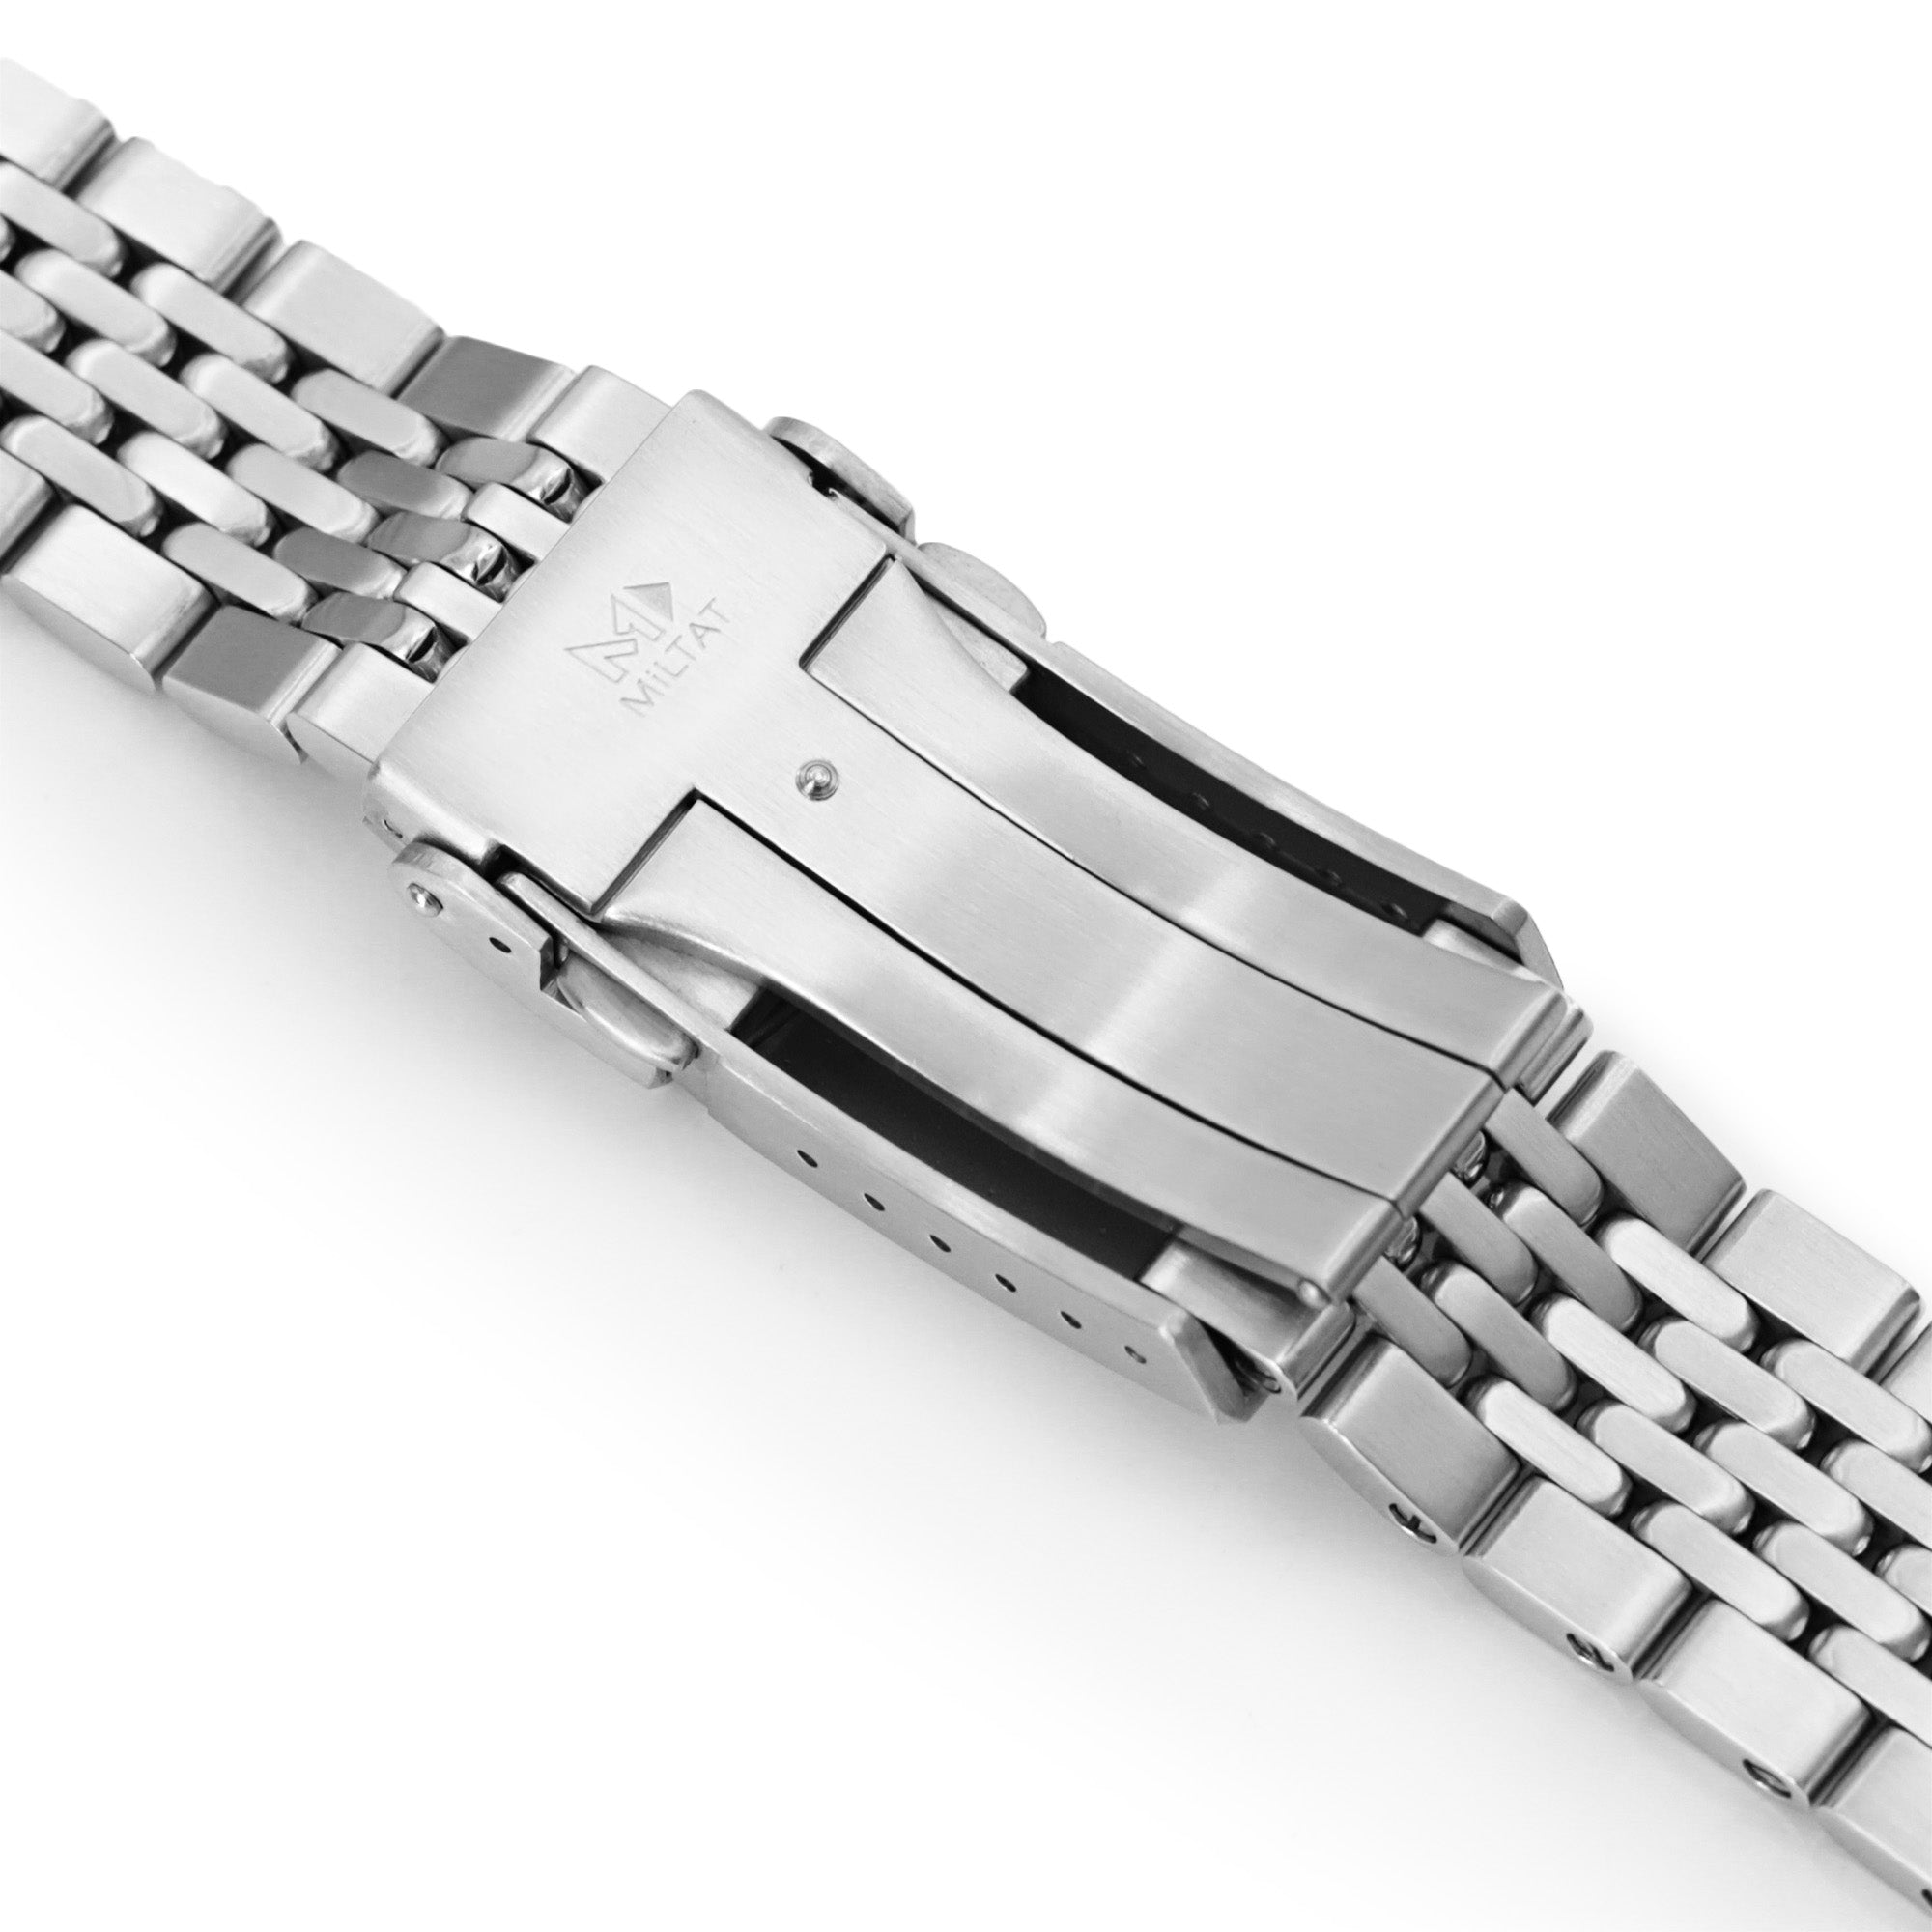 22mm Goma BOR Watch Band compatible with Seiko SKX007, 316L Stainless Steel Brushed and Polished V-Clasp